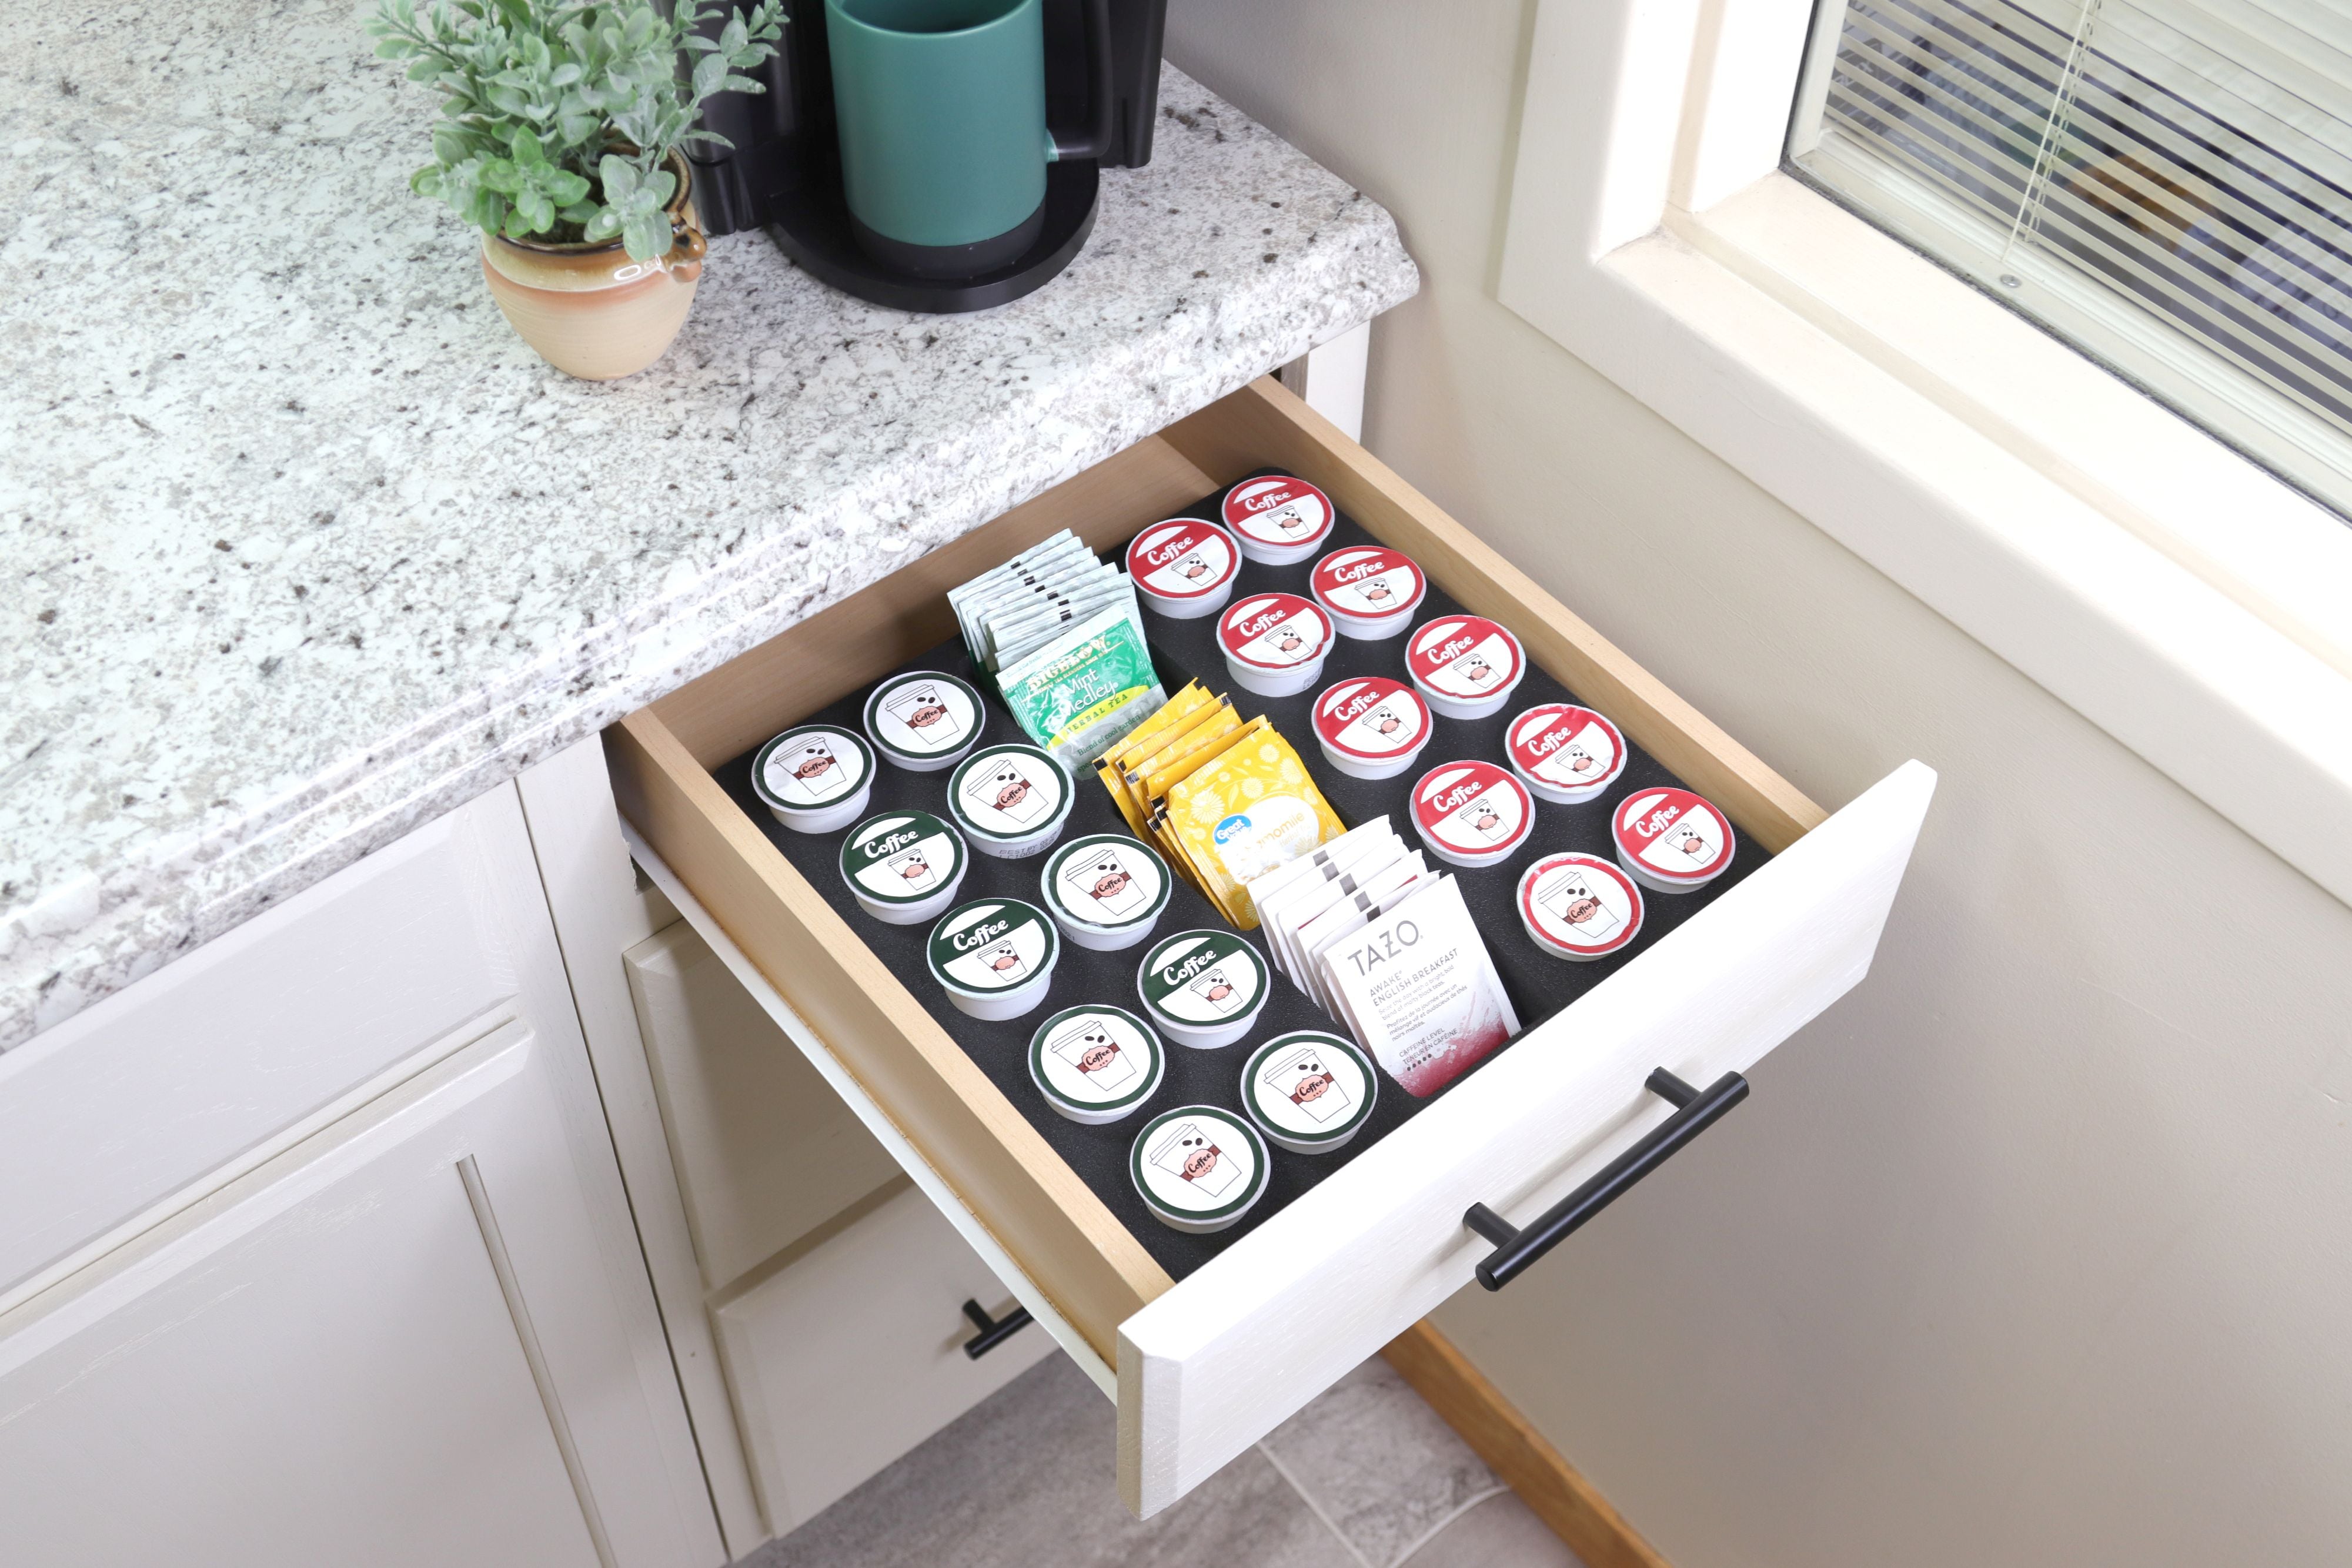 Coffee Pod and Tea Bag Storage Organizer Tray Drawer Insert for Kitchen Home Office 12.5 x 12.5 Inches Holds 20 Compatible with Keurig K-Cup